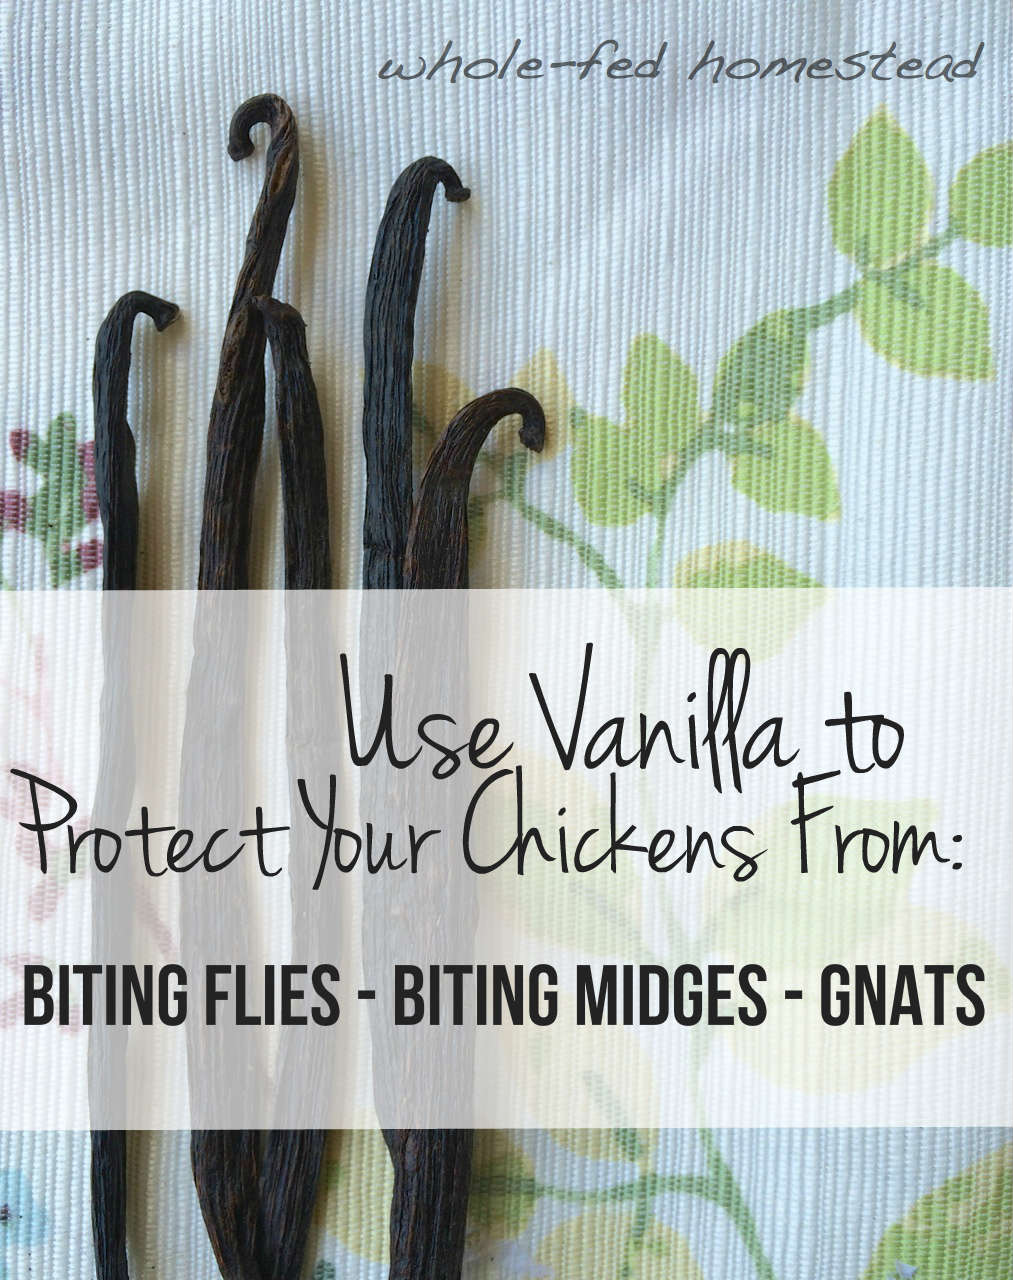 Use Vanilla to Protect Your Chickens from Gnats, Biting Flies, and Biting Midges